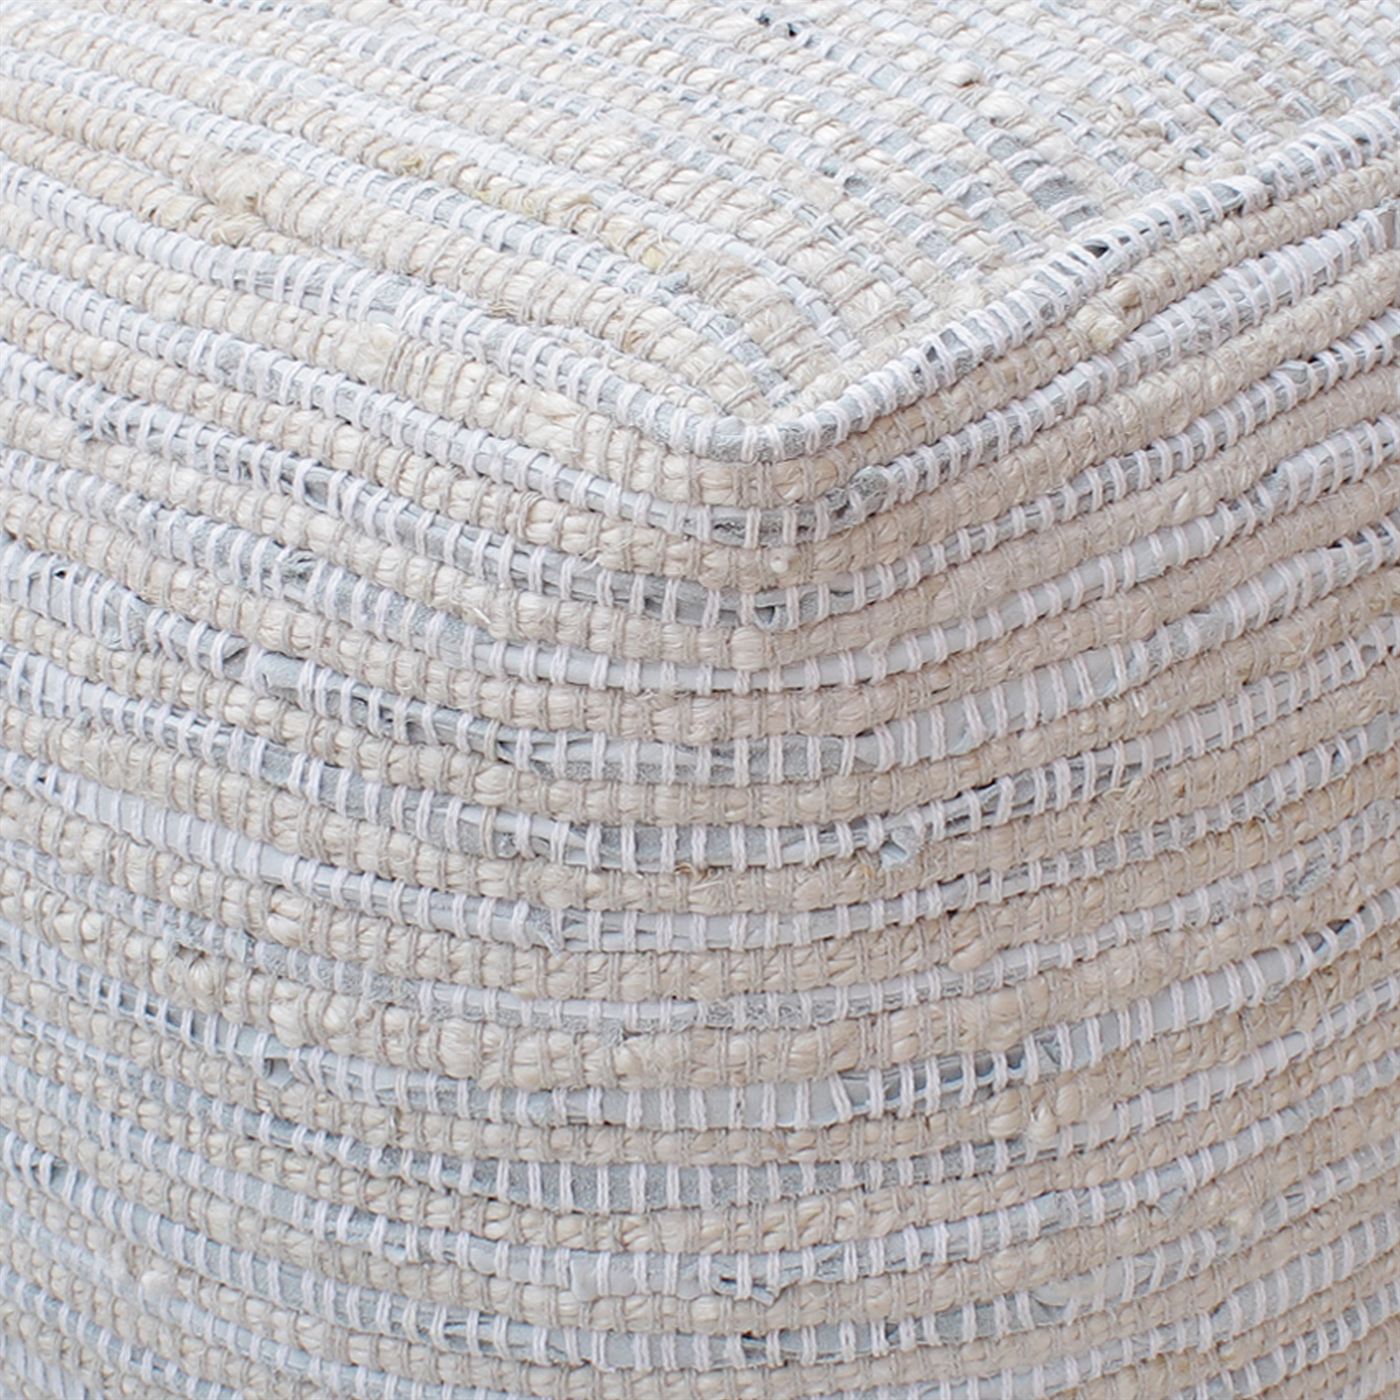 Capulin Pouf, Leather, Jute, Natural White, PITLOOM / FLAT WEAVE